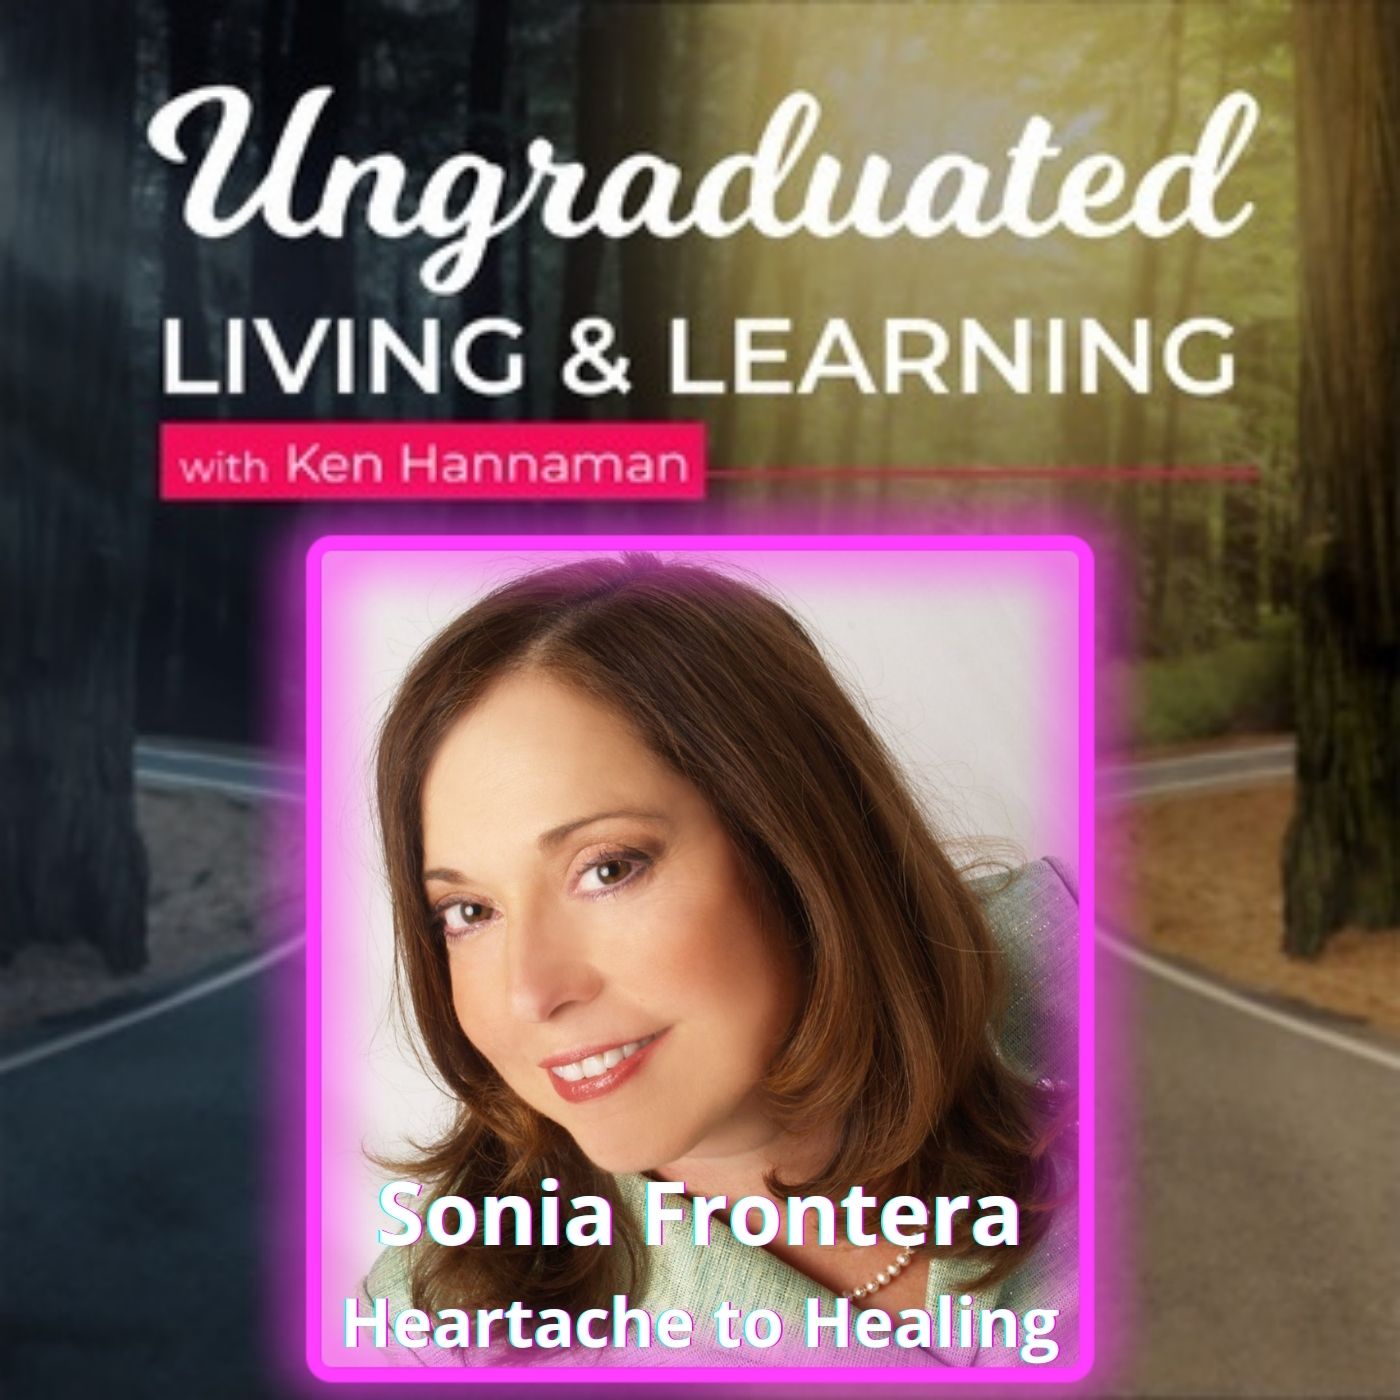 graphic promoting ungraduated living and learninng with ken hannaman featuring relationship expert